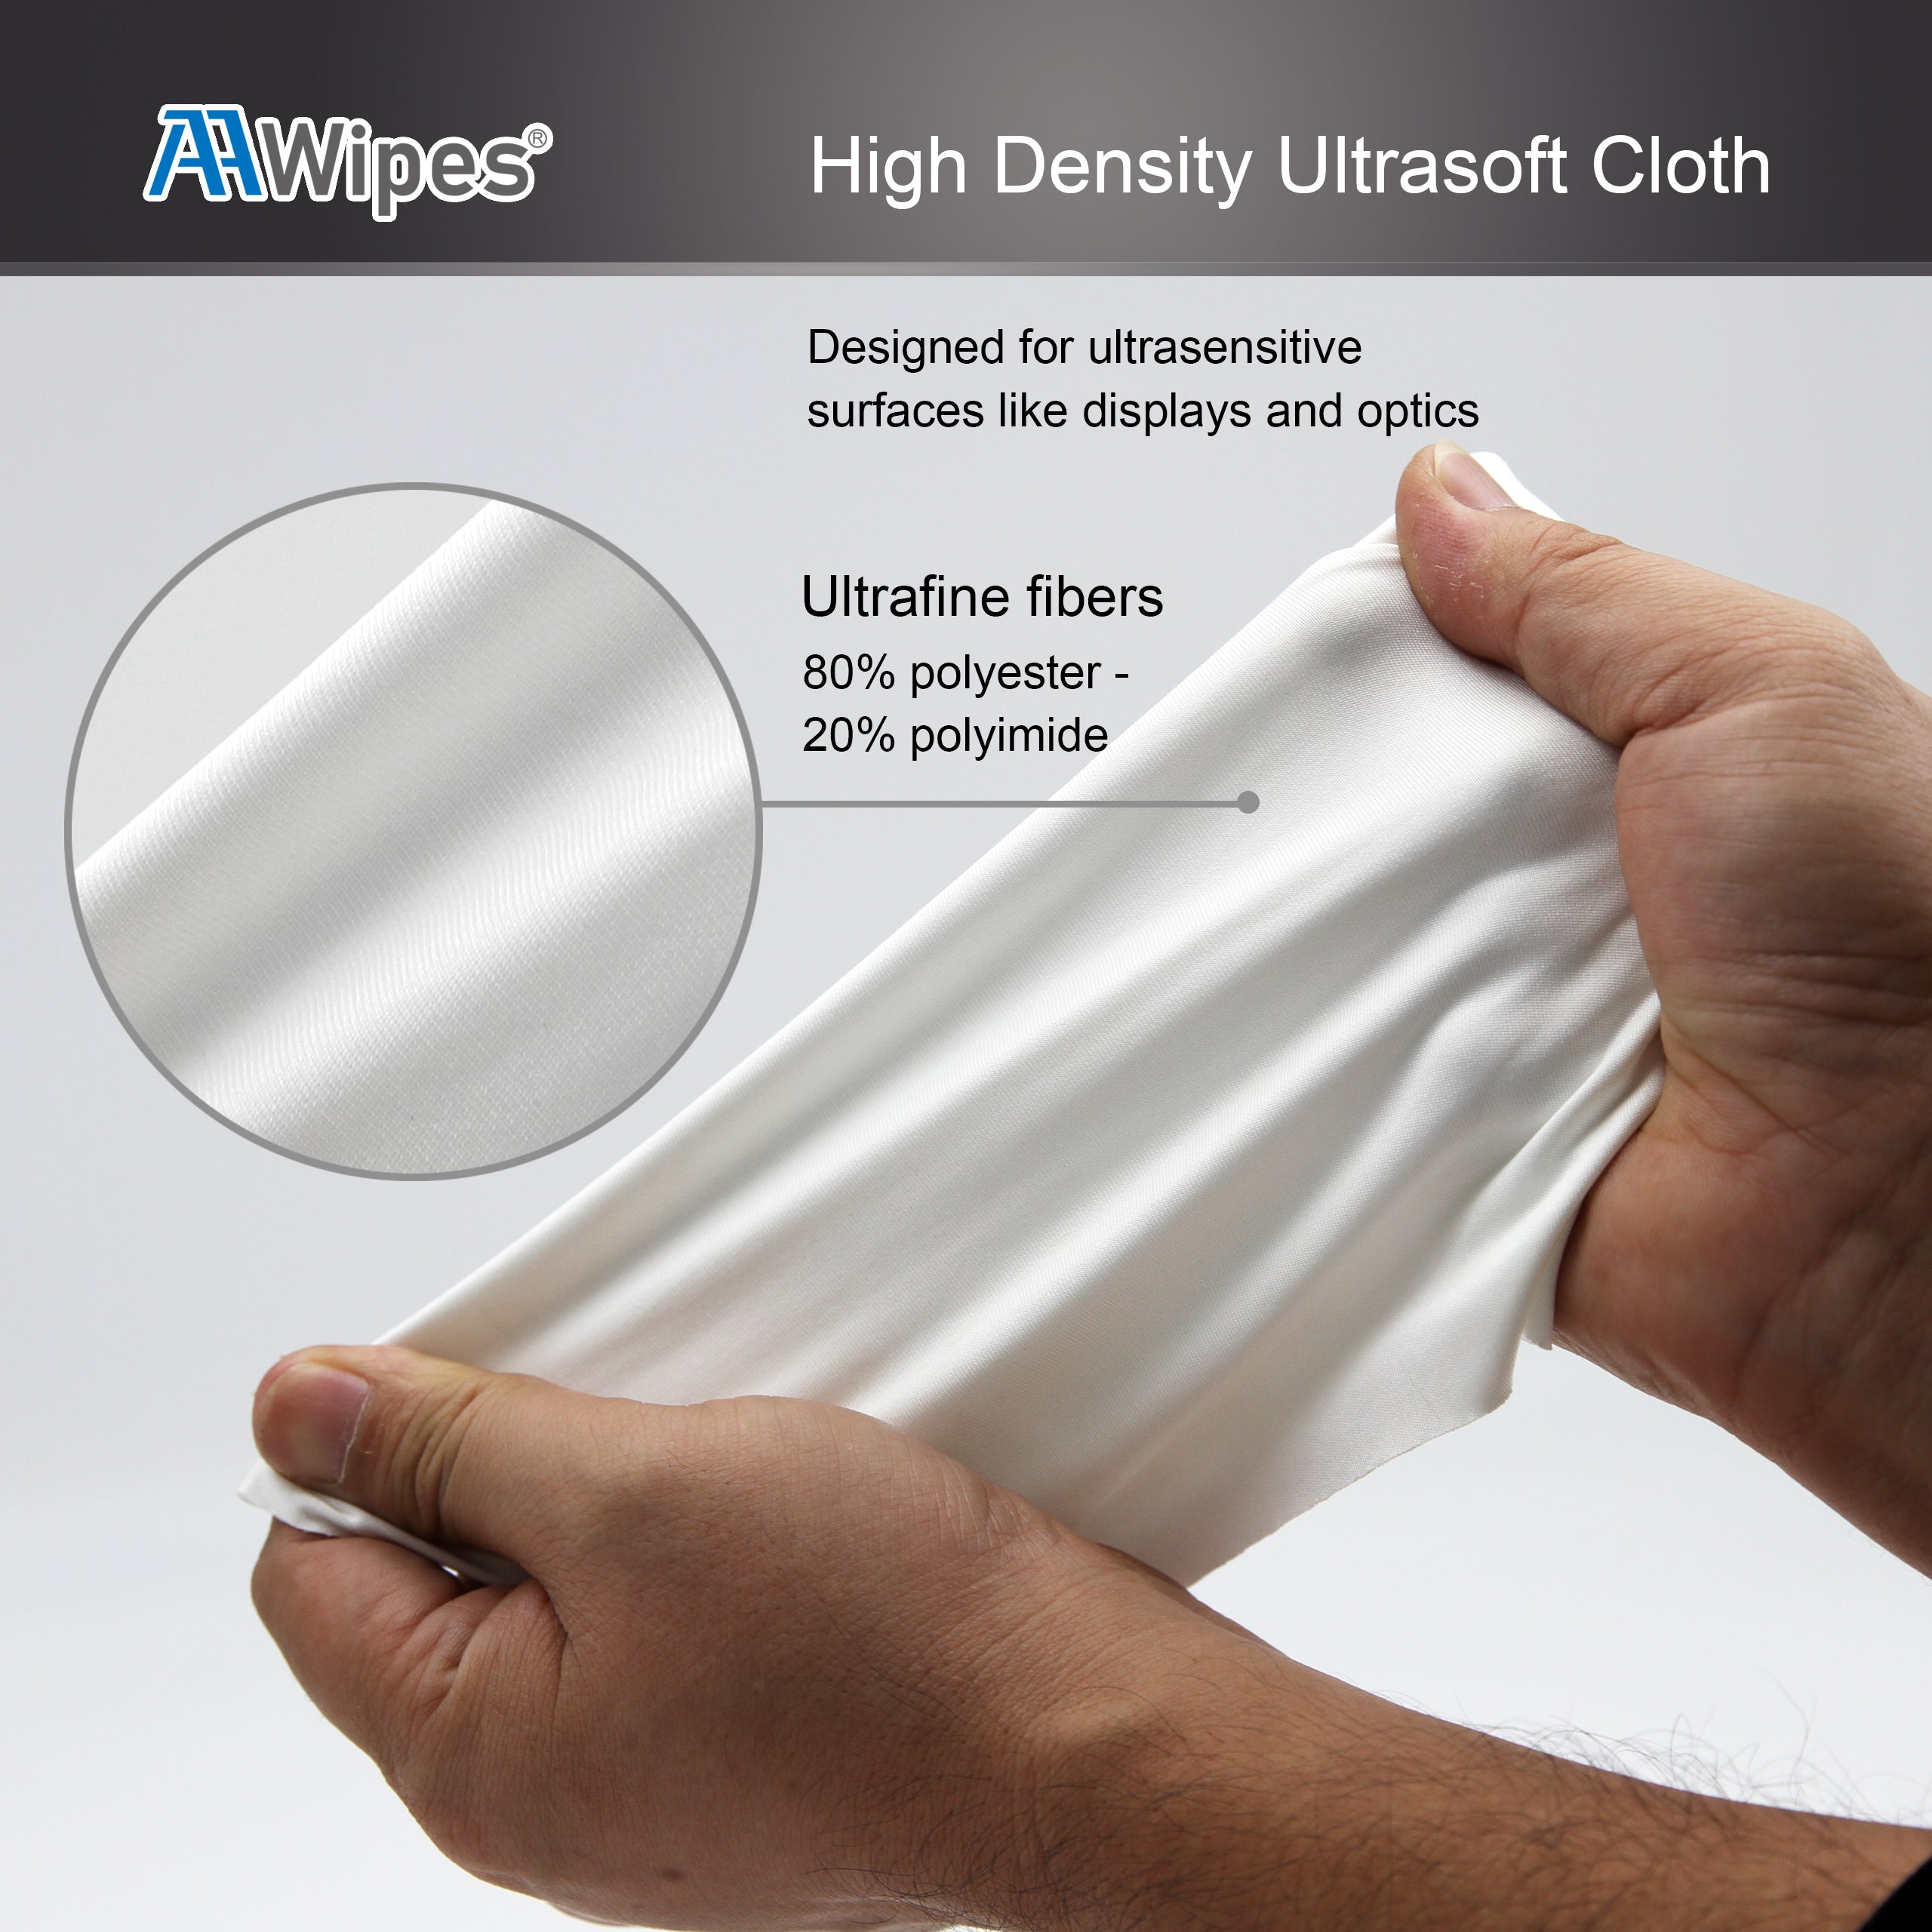 Aawipes cleanroom wipers, 100% High-Strength Polyester Microfiber Cleanroom Cloth is laser cut with ultrasonically sealed edges. Manufactured in class 10-100 (ISO Class 4-5) cleanroom environment, laundered in ultra-pure water, and hermetically sealed. Extremely soft, non-abrasive material. Fast-drying, high-density weave that increases absorption multiple times. High-strength, lint-free, synthetic fiber filaments resist wear and tear, keeping your cleanroom clean!